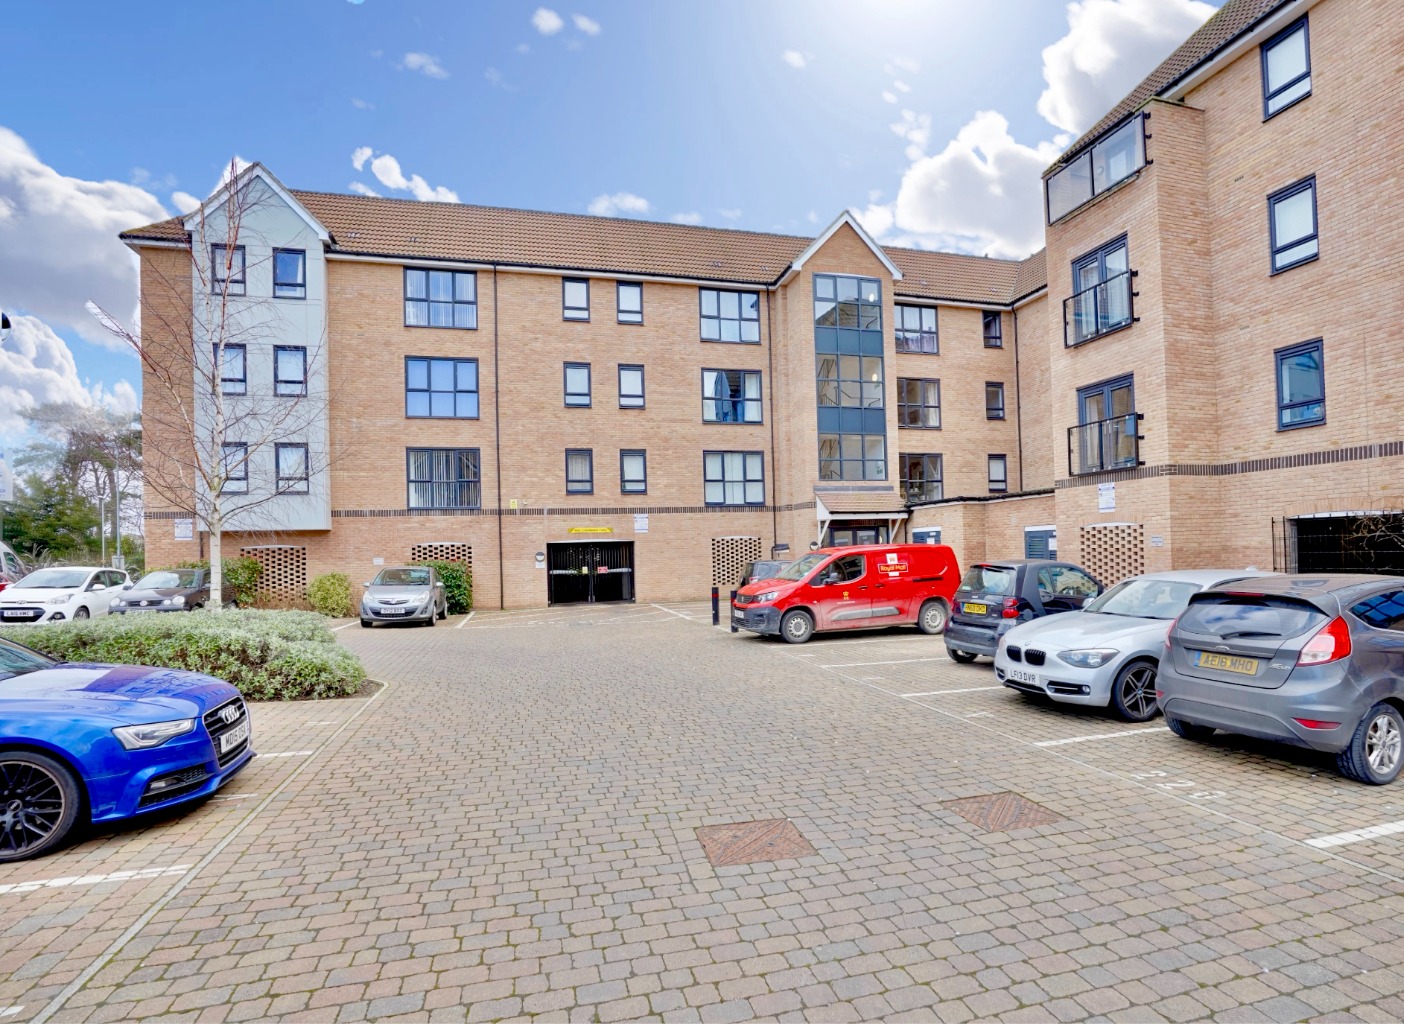 **spacious one double bedroom apartment* Open plan living with juliette balcony* Underground secure parking* Ideal investment/first time buy* Plenty of visitor parking* Close to town centre